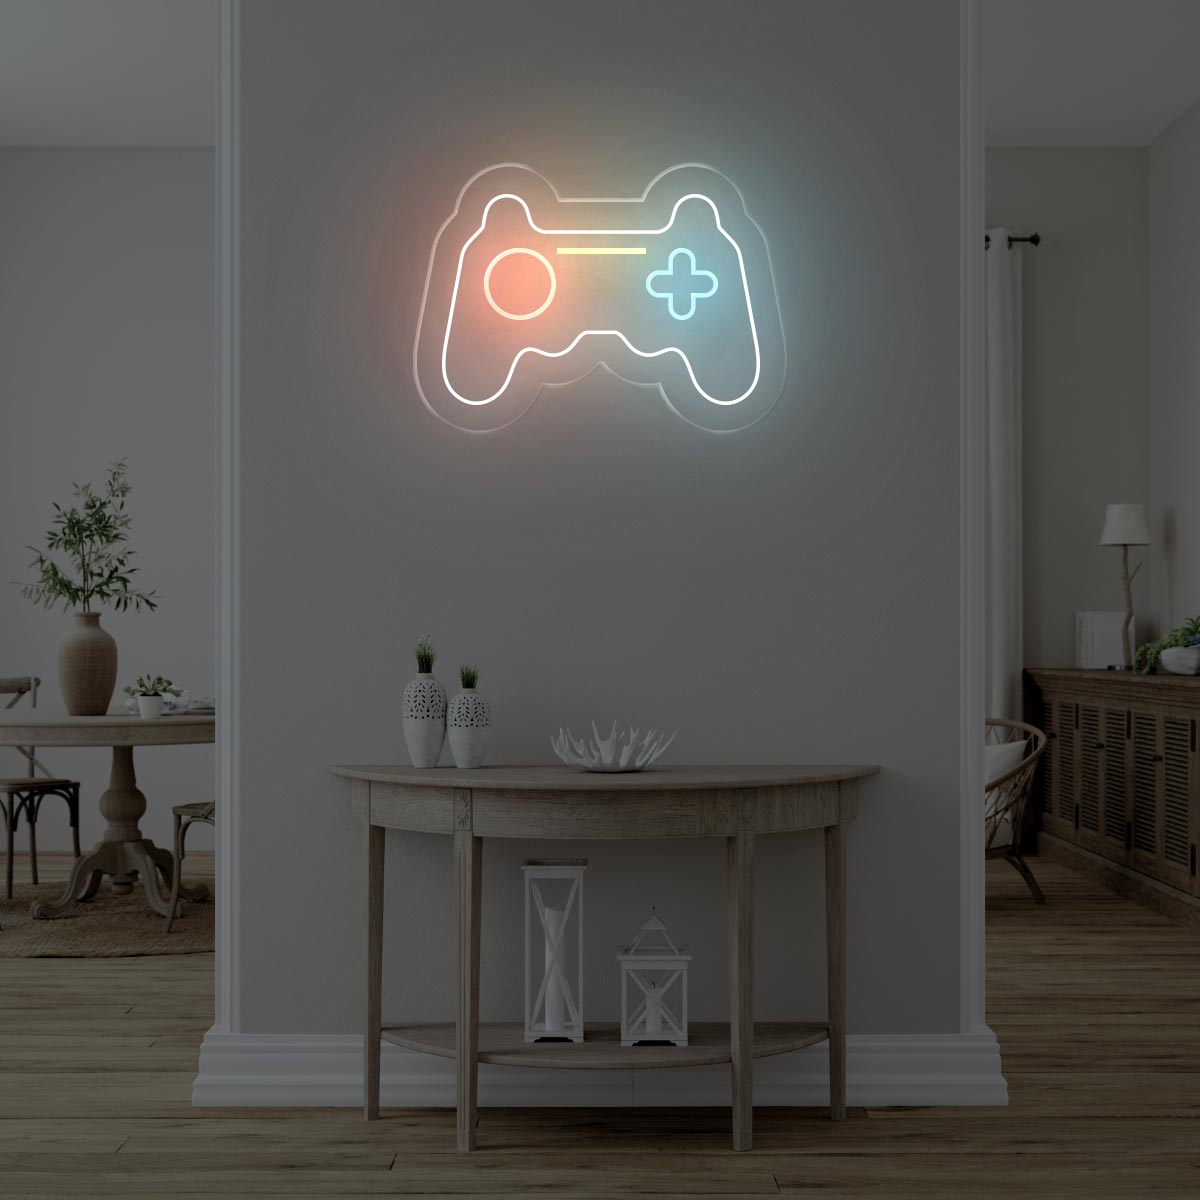 Game Controller Neon Sign - Essential Game Room Decor - NEONXPERT